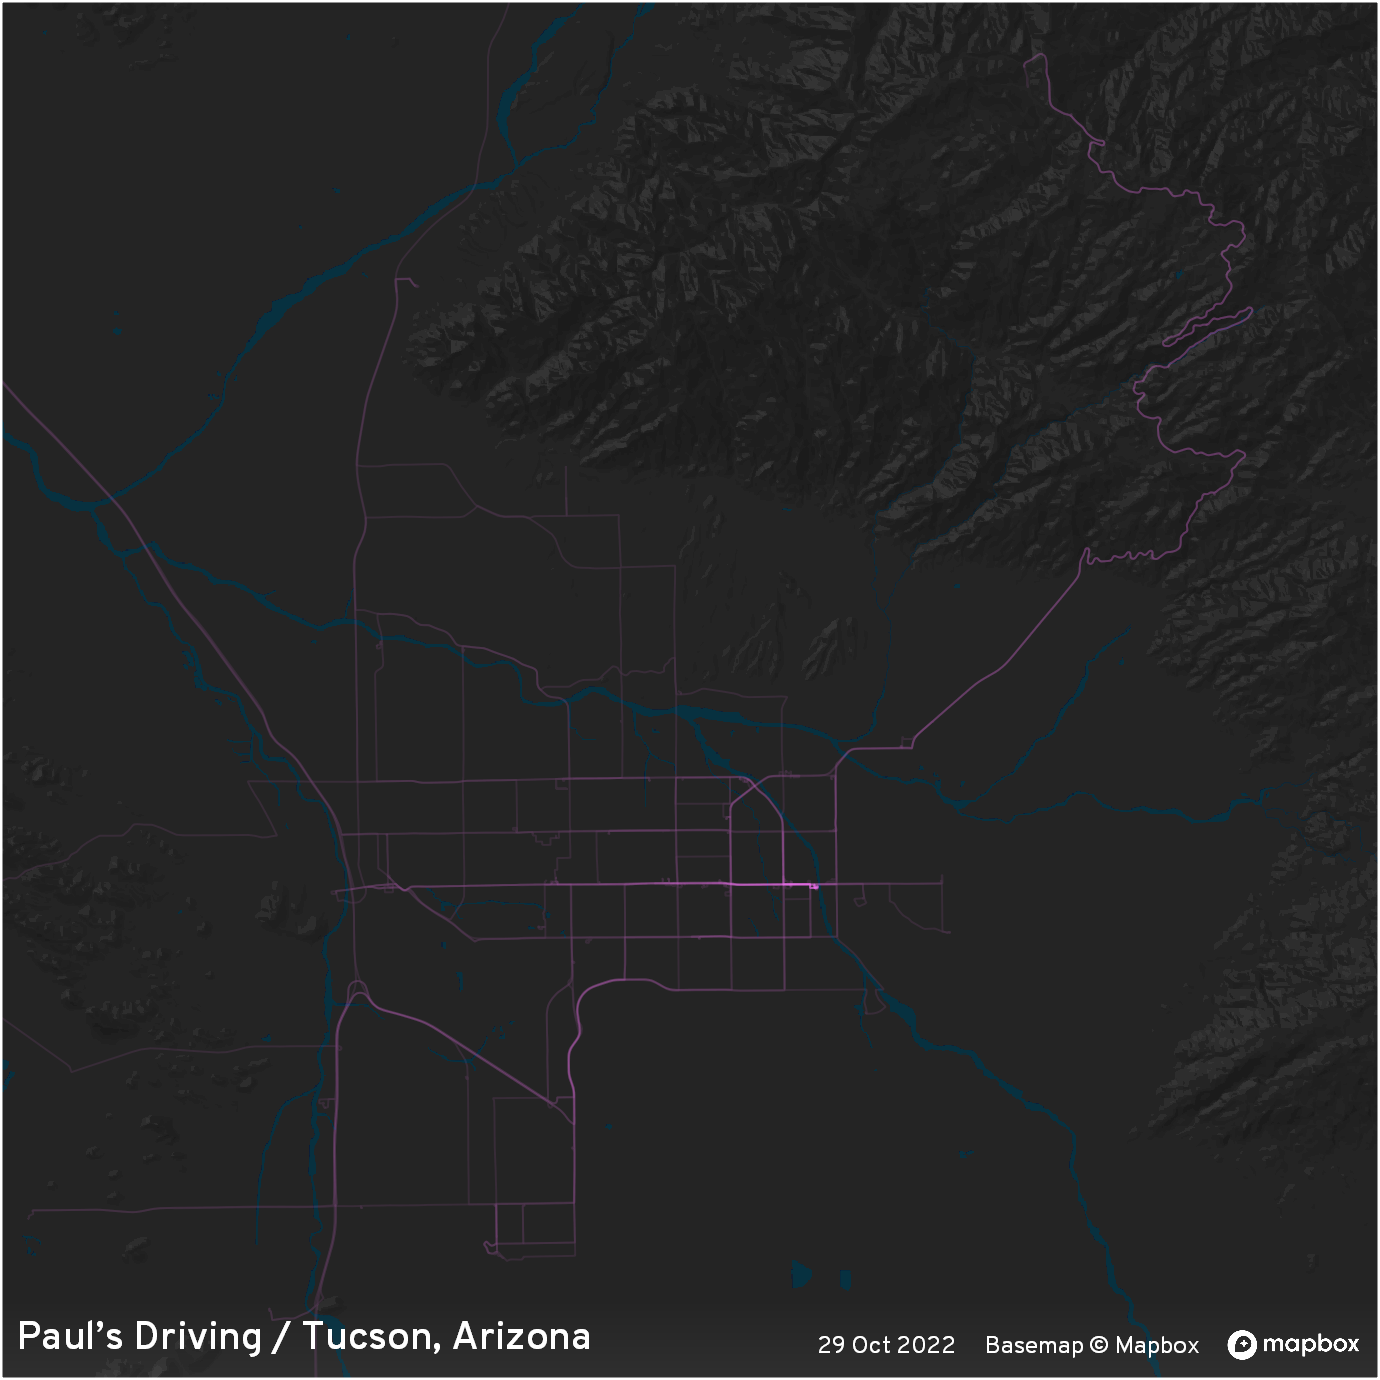 Driving density map of downtown Tucson, Arizona as of 29 Oct 2022.